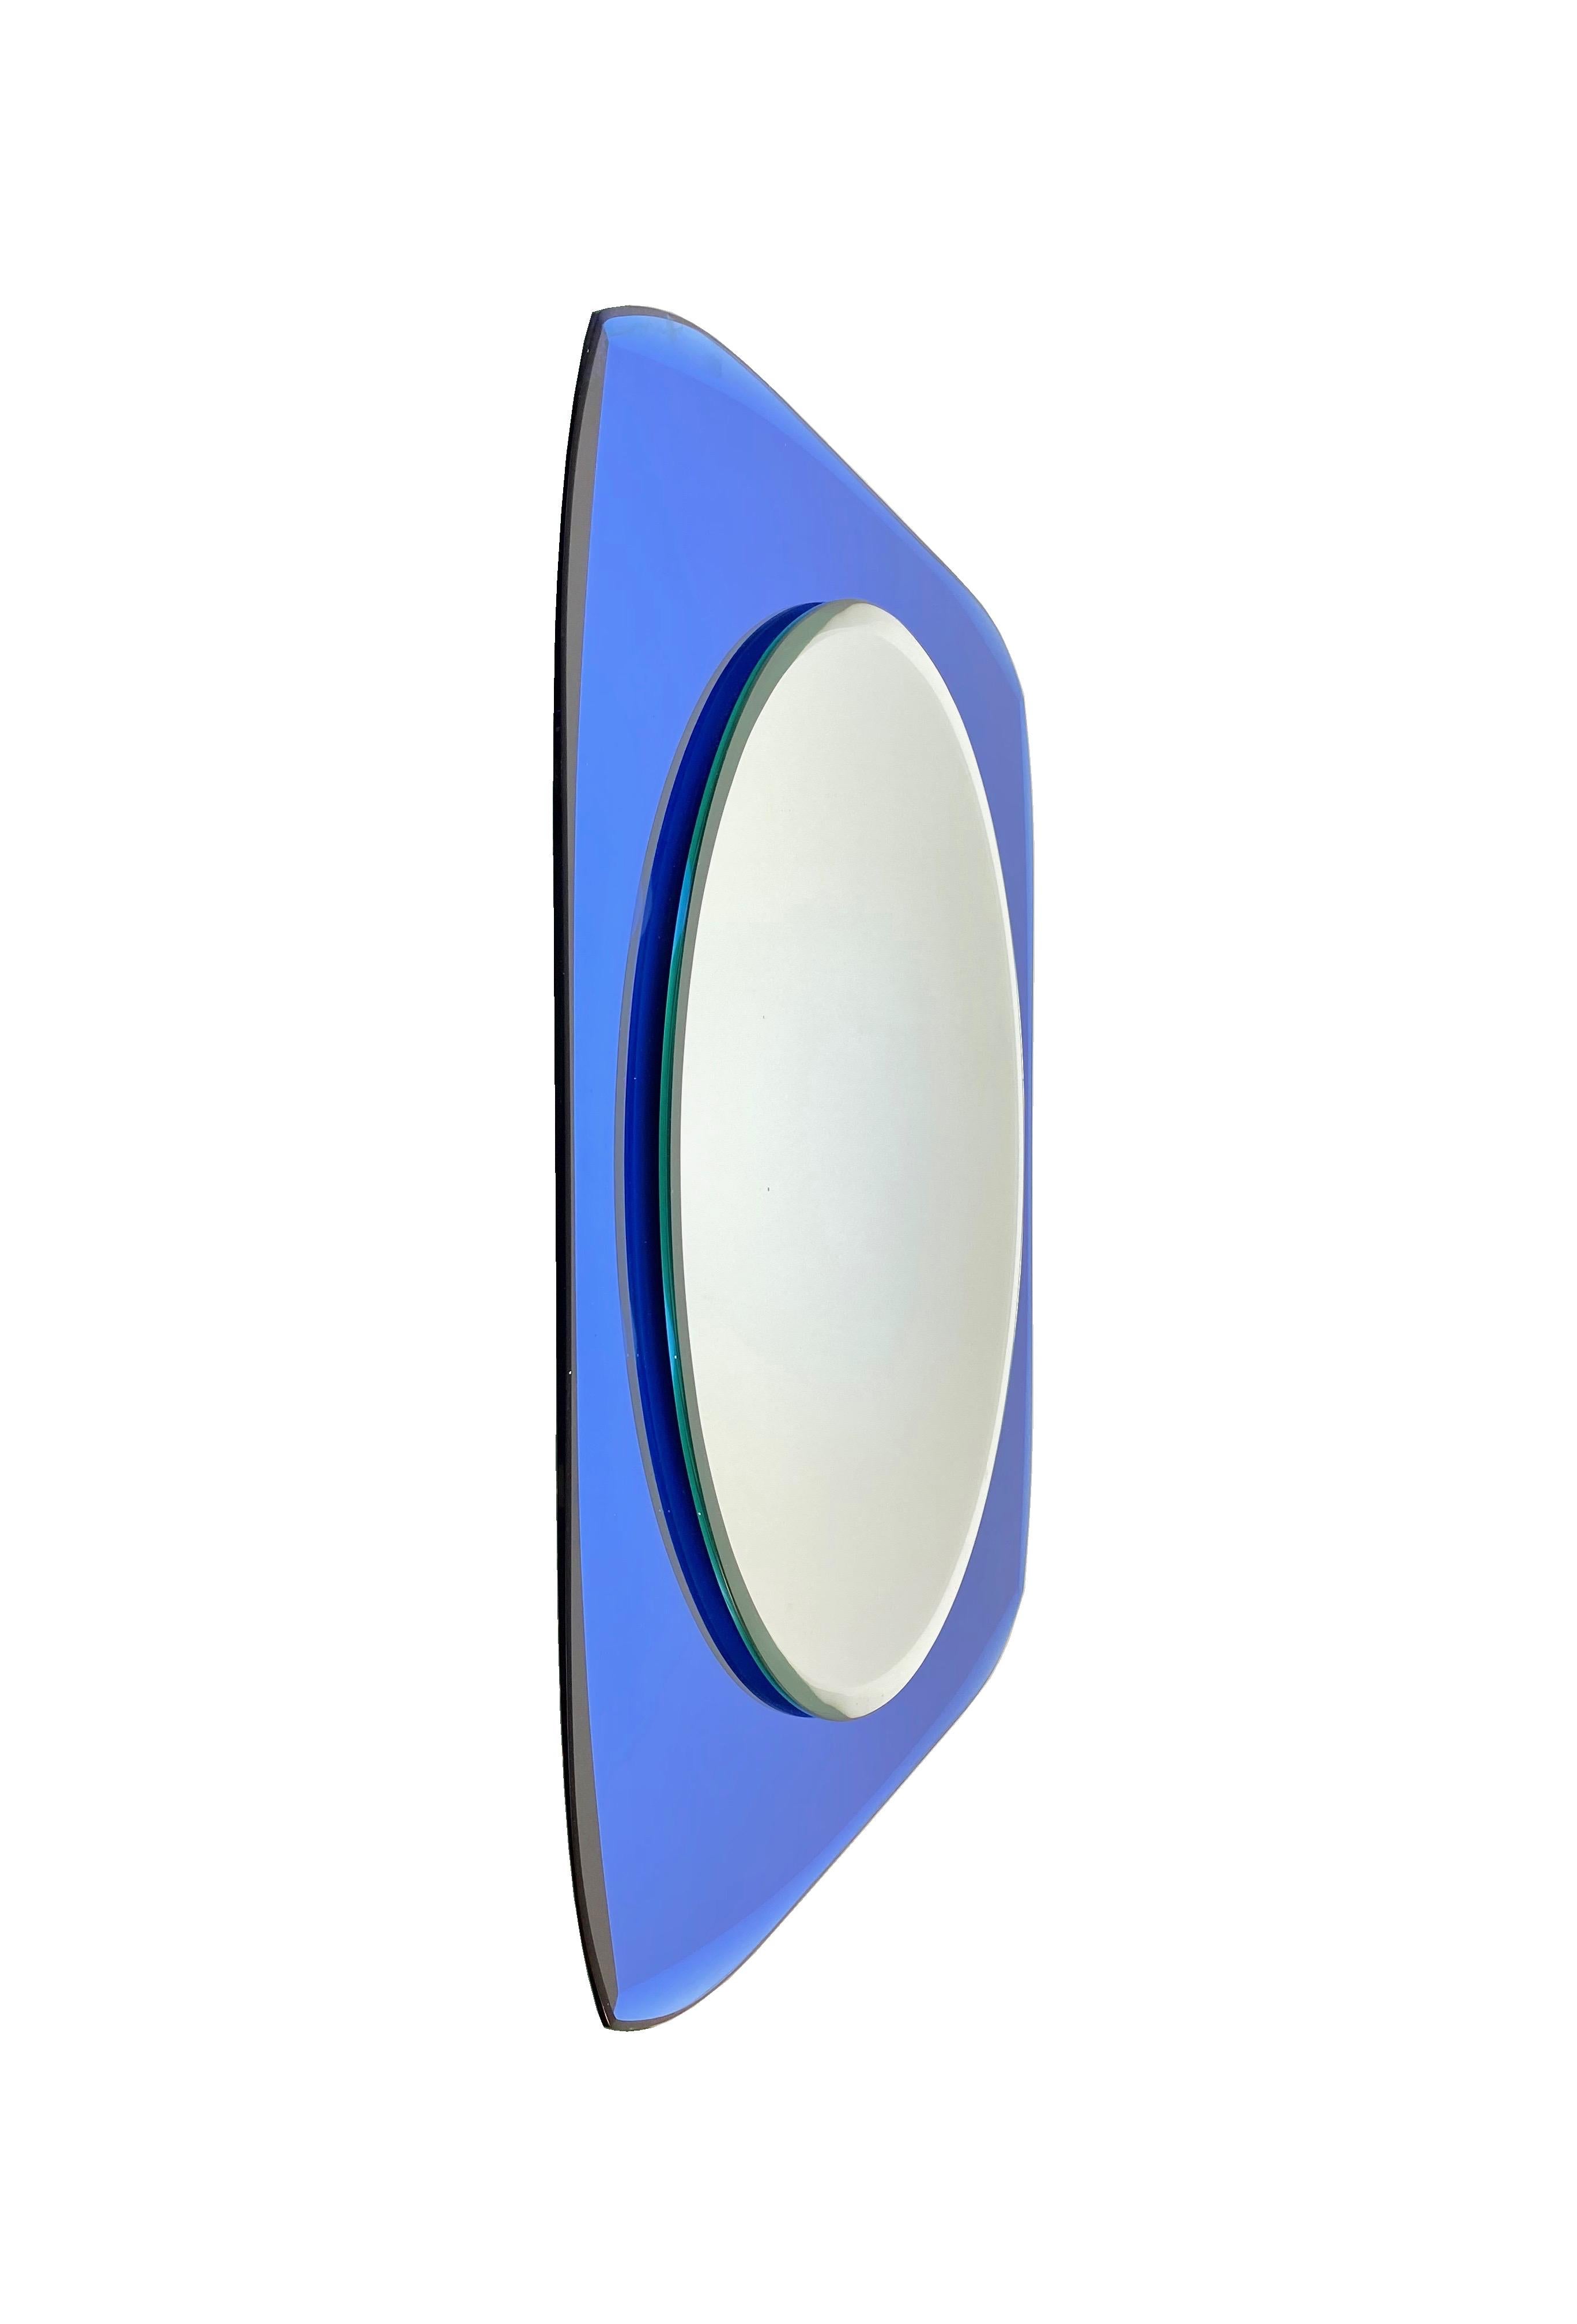 Mid-Century Modern Squared Wall Mirror Blue Attributed to Fontana Arte, Italy, 1960s For Sale